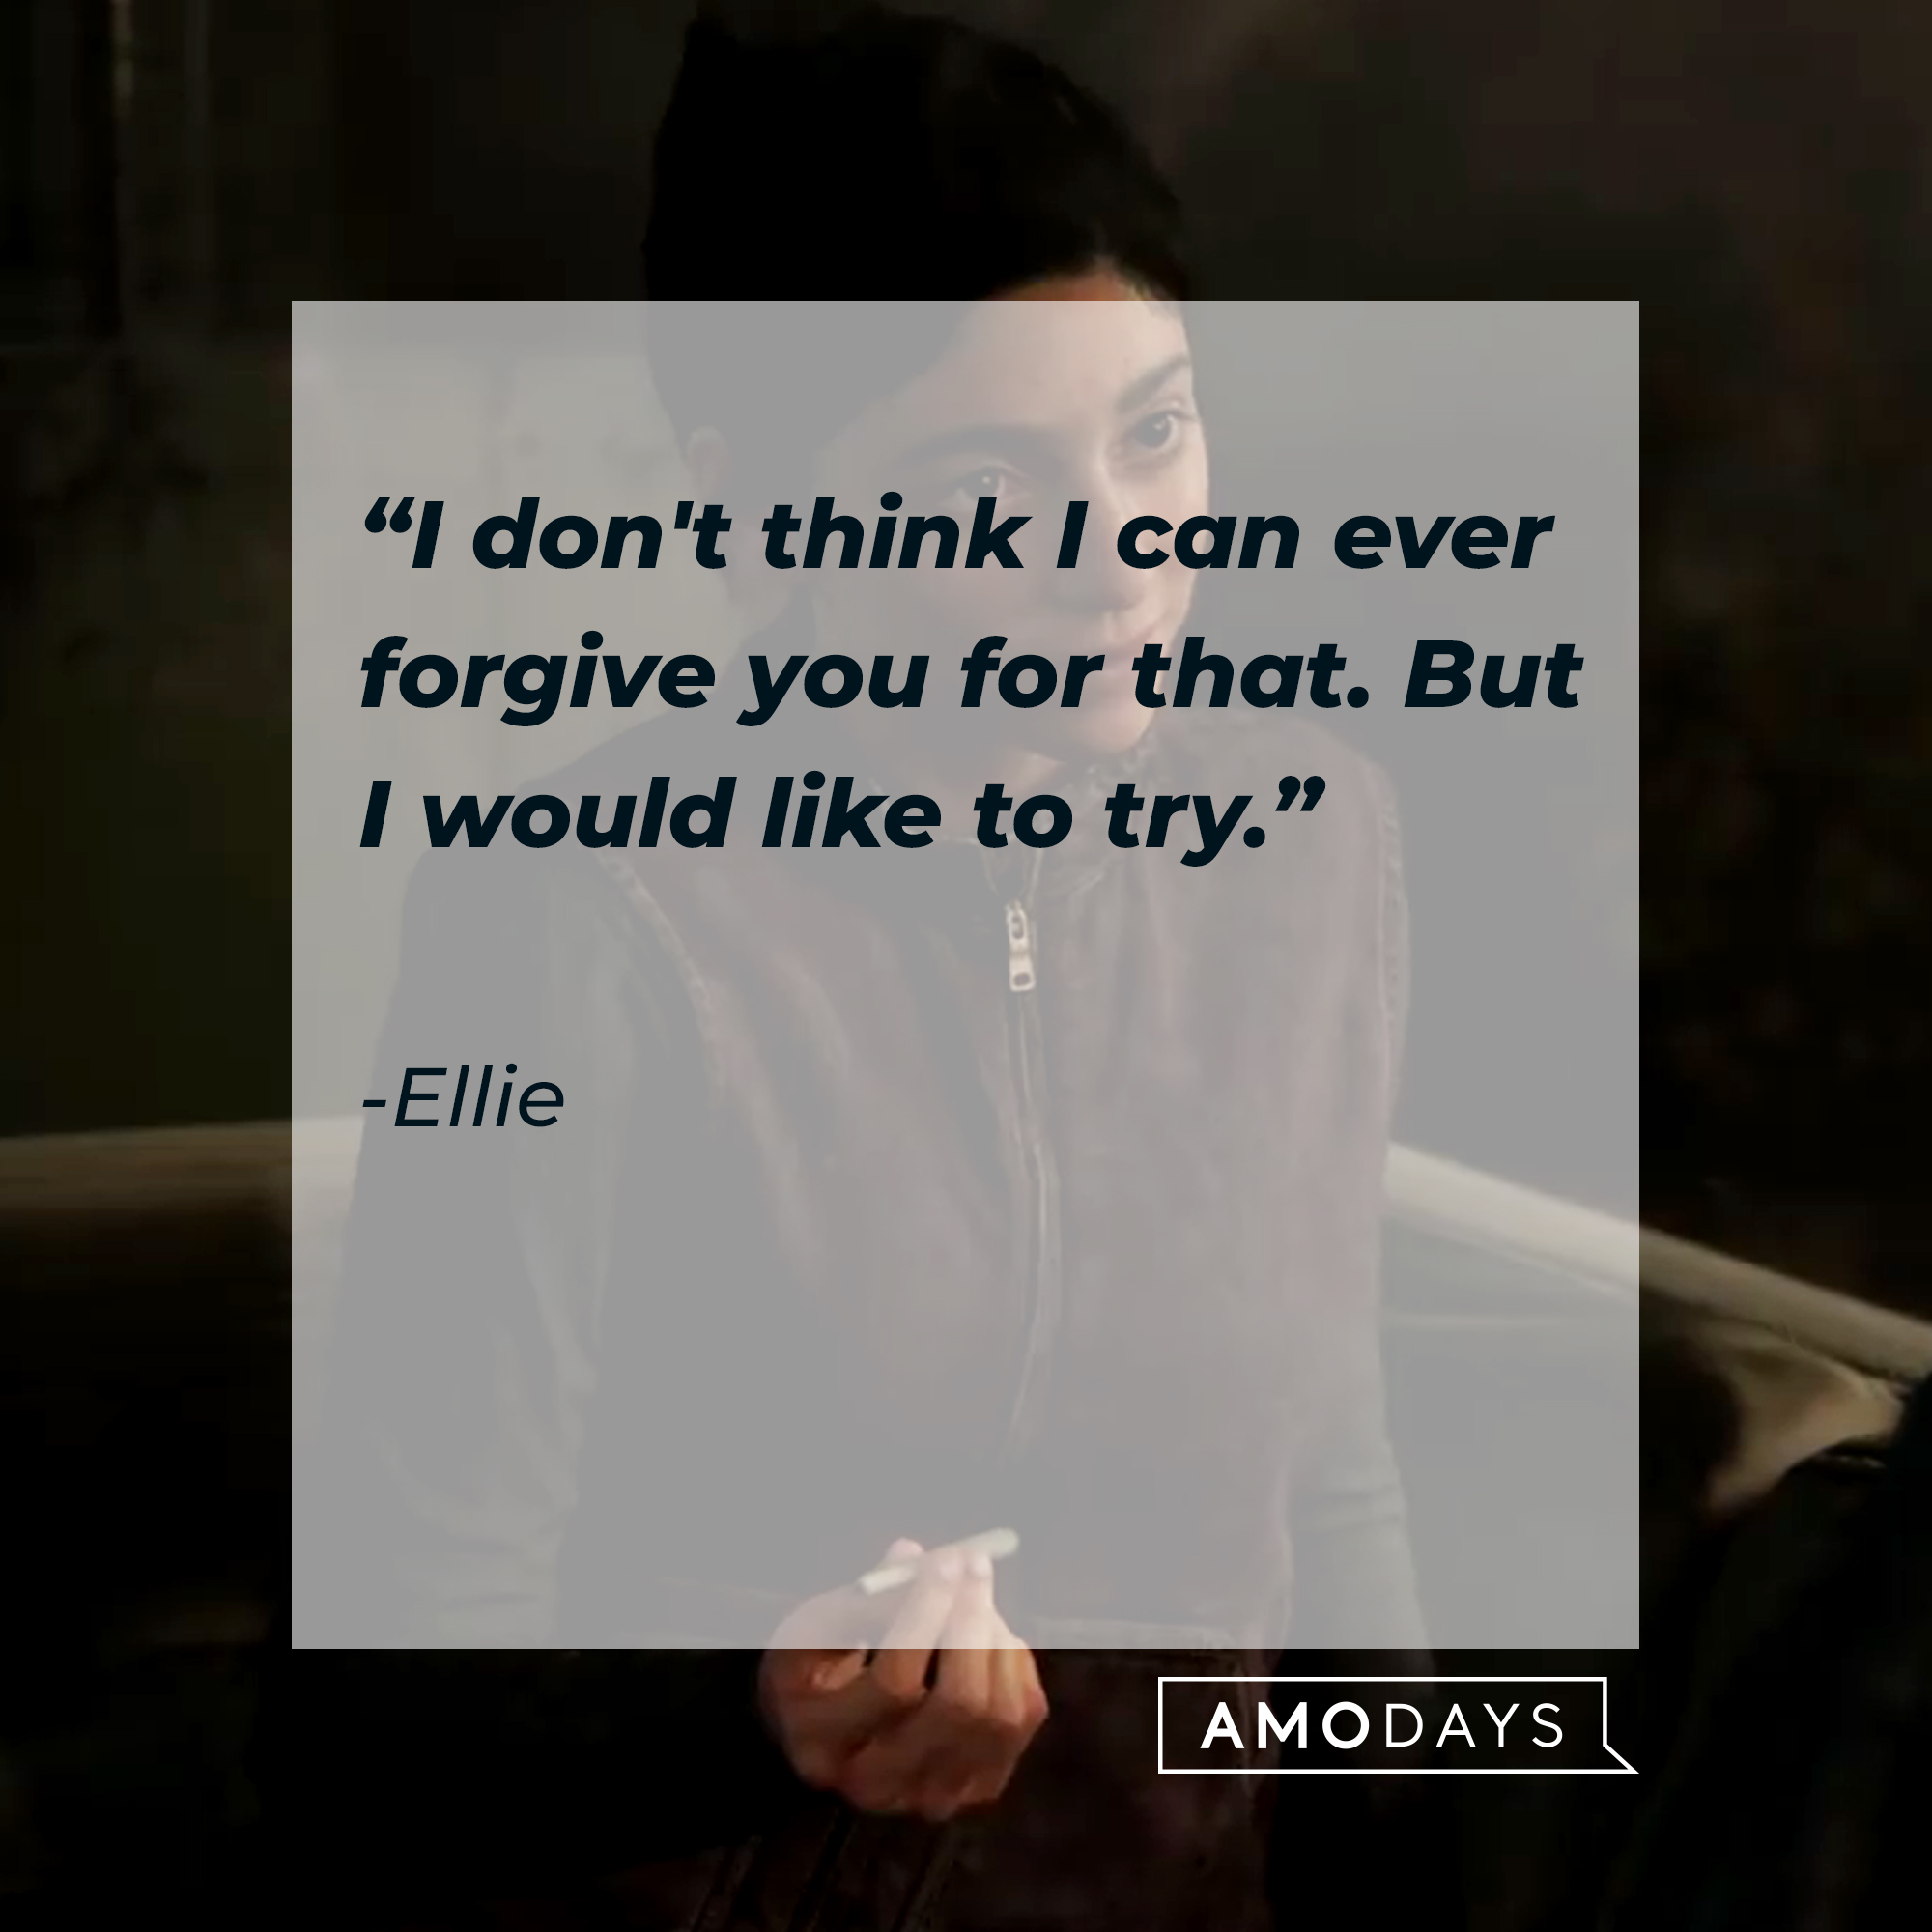 An image of Ellie, with her quote: "I don't think I can ever forgive you for that. But I would like to try." | Source: Facebook.com/TLOUPS